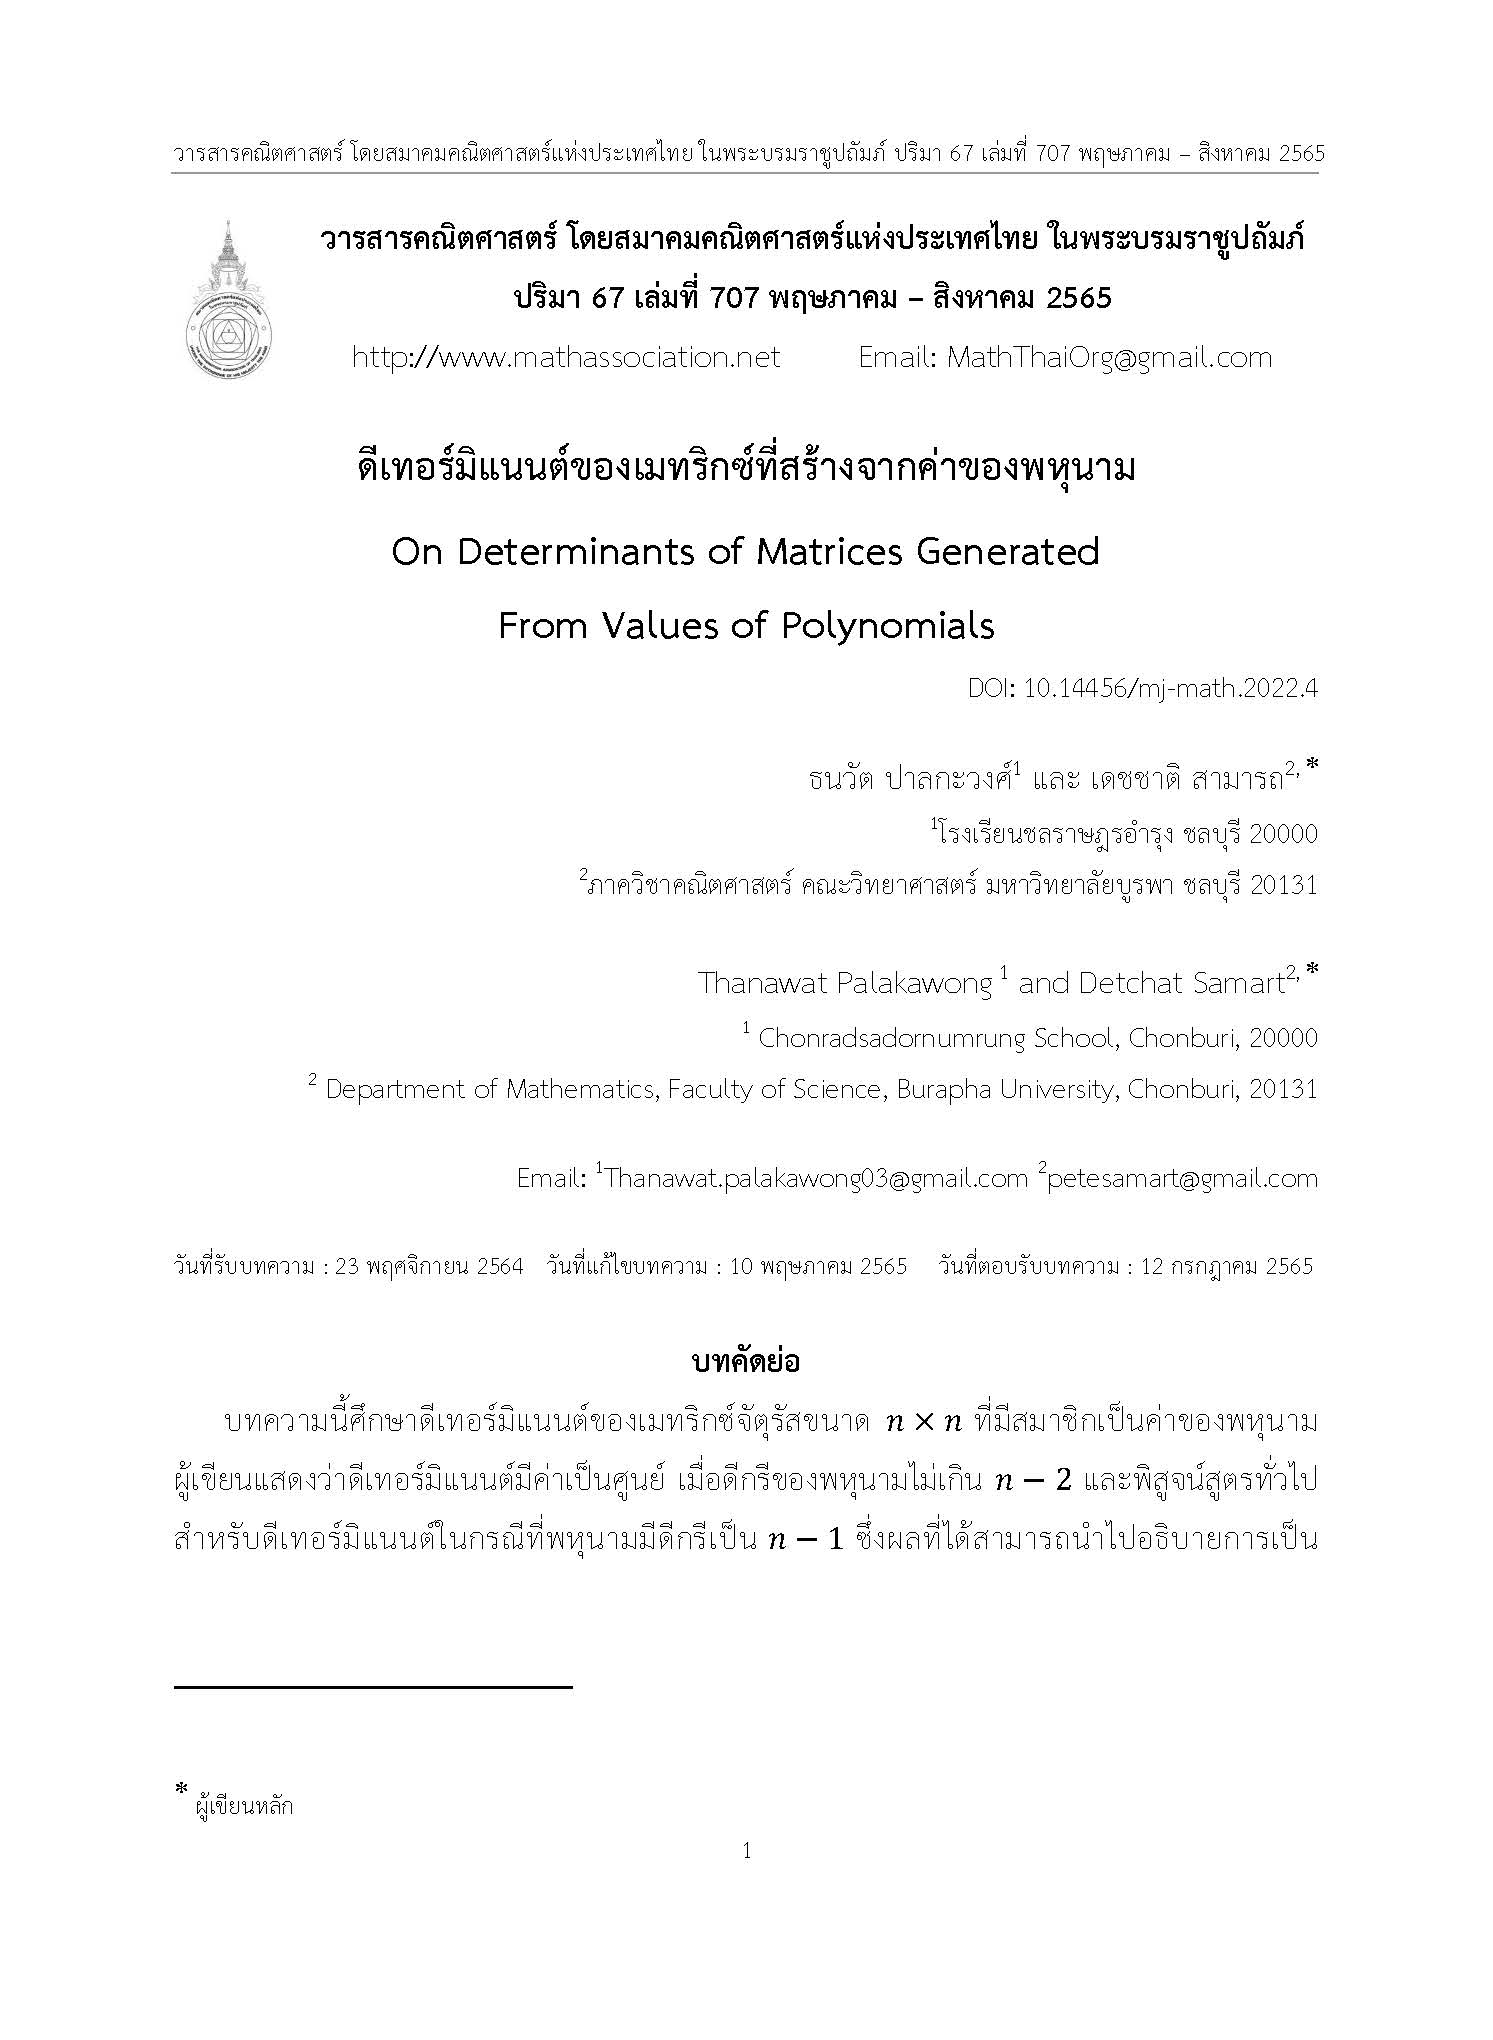 On Determinants of Matrices Generated From Values of Polynomials